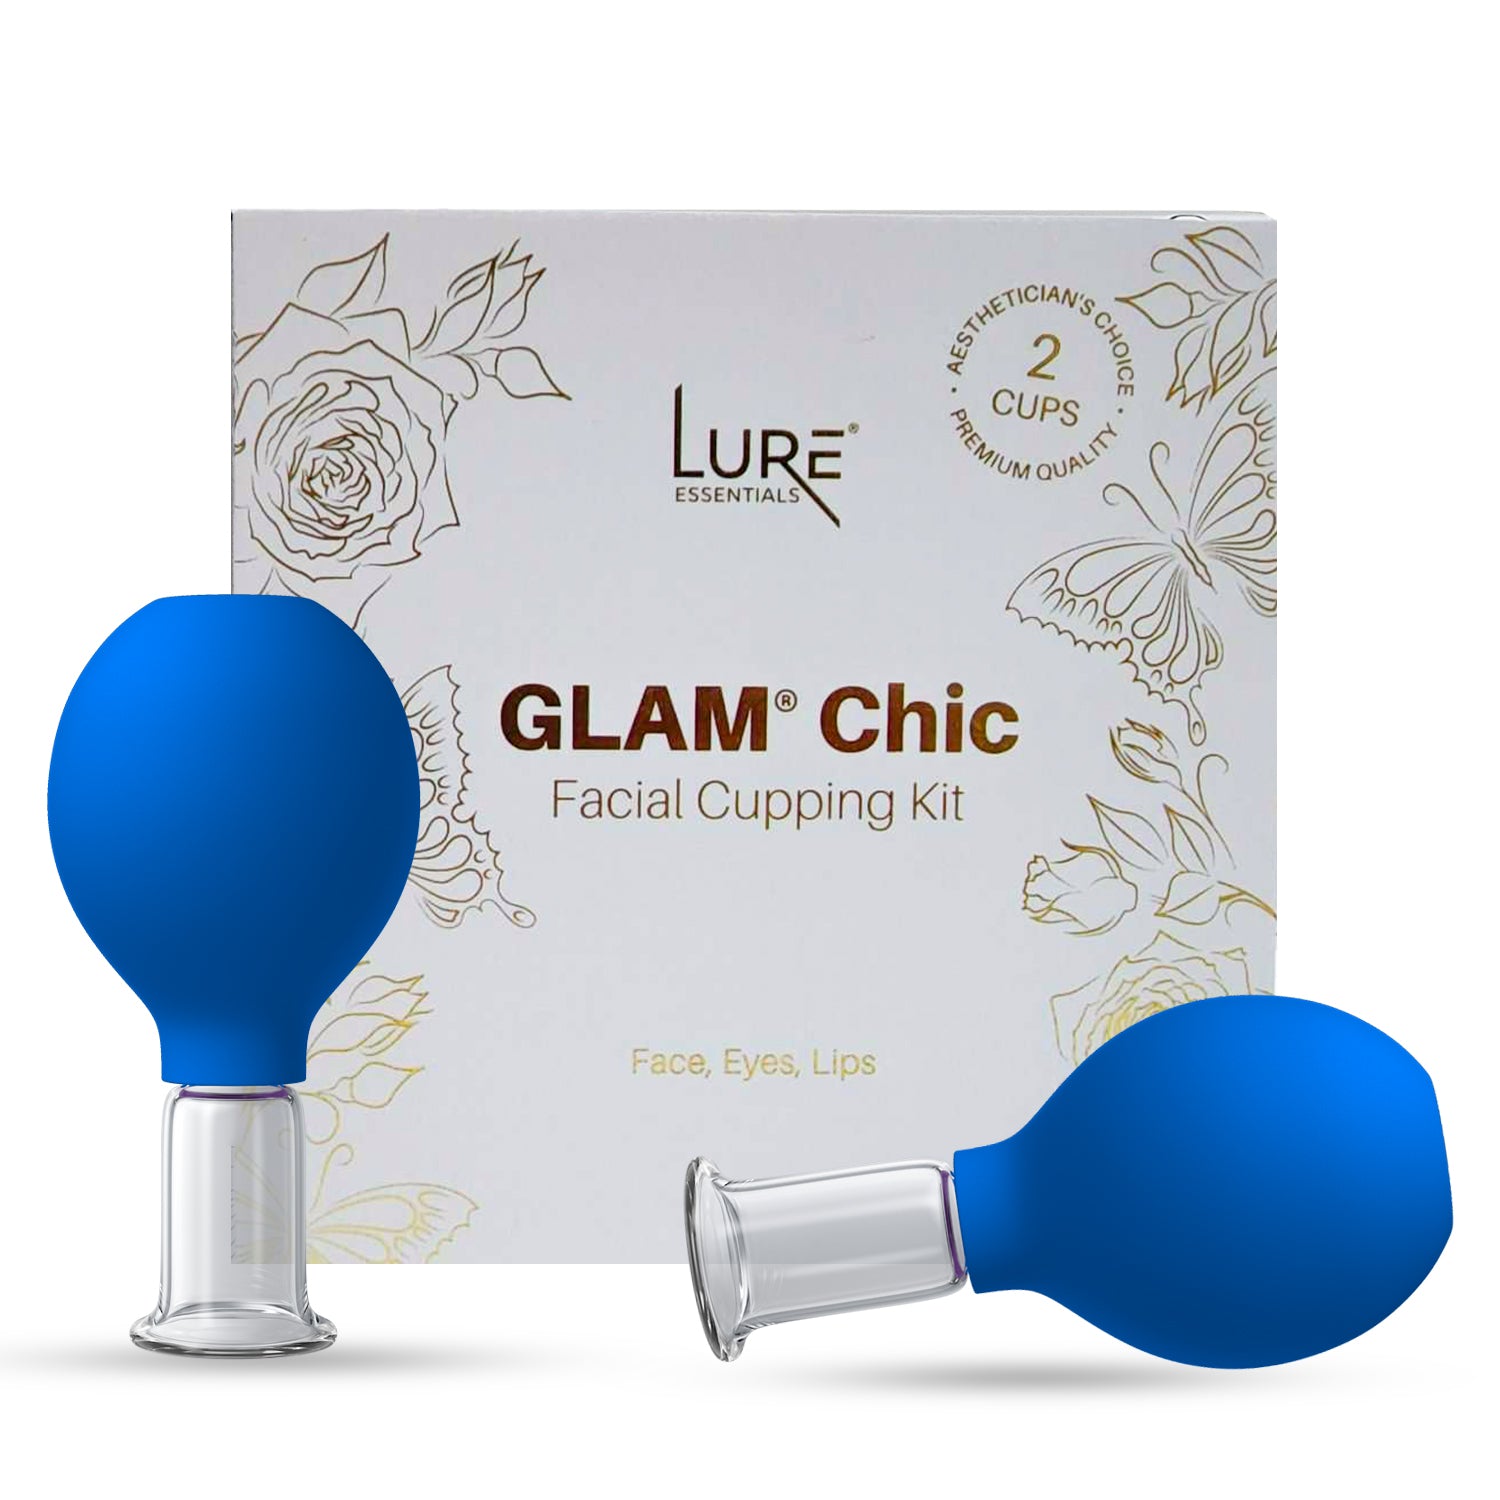 NEW! Glam Chic Face & Eyes Cupping Set - Blue - Lure Essentials